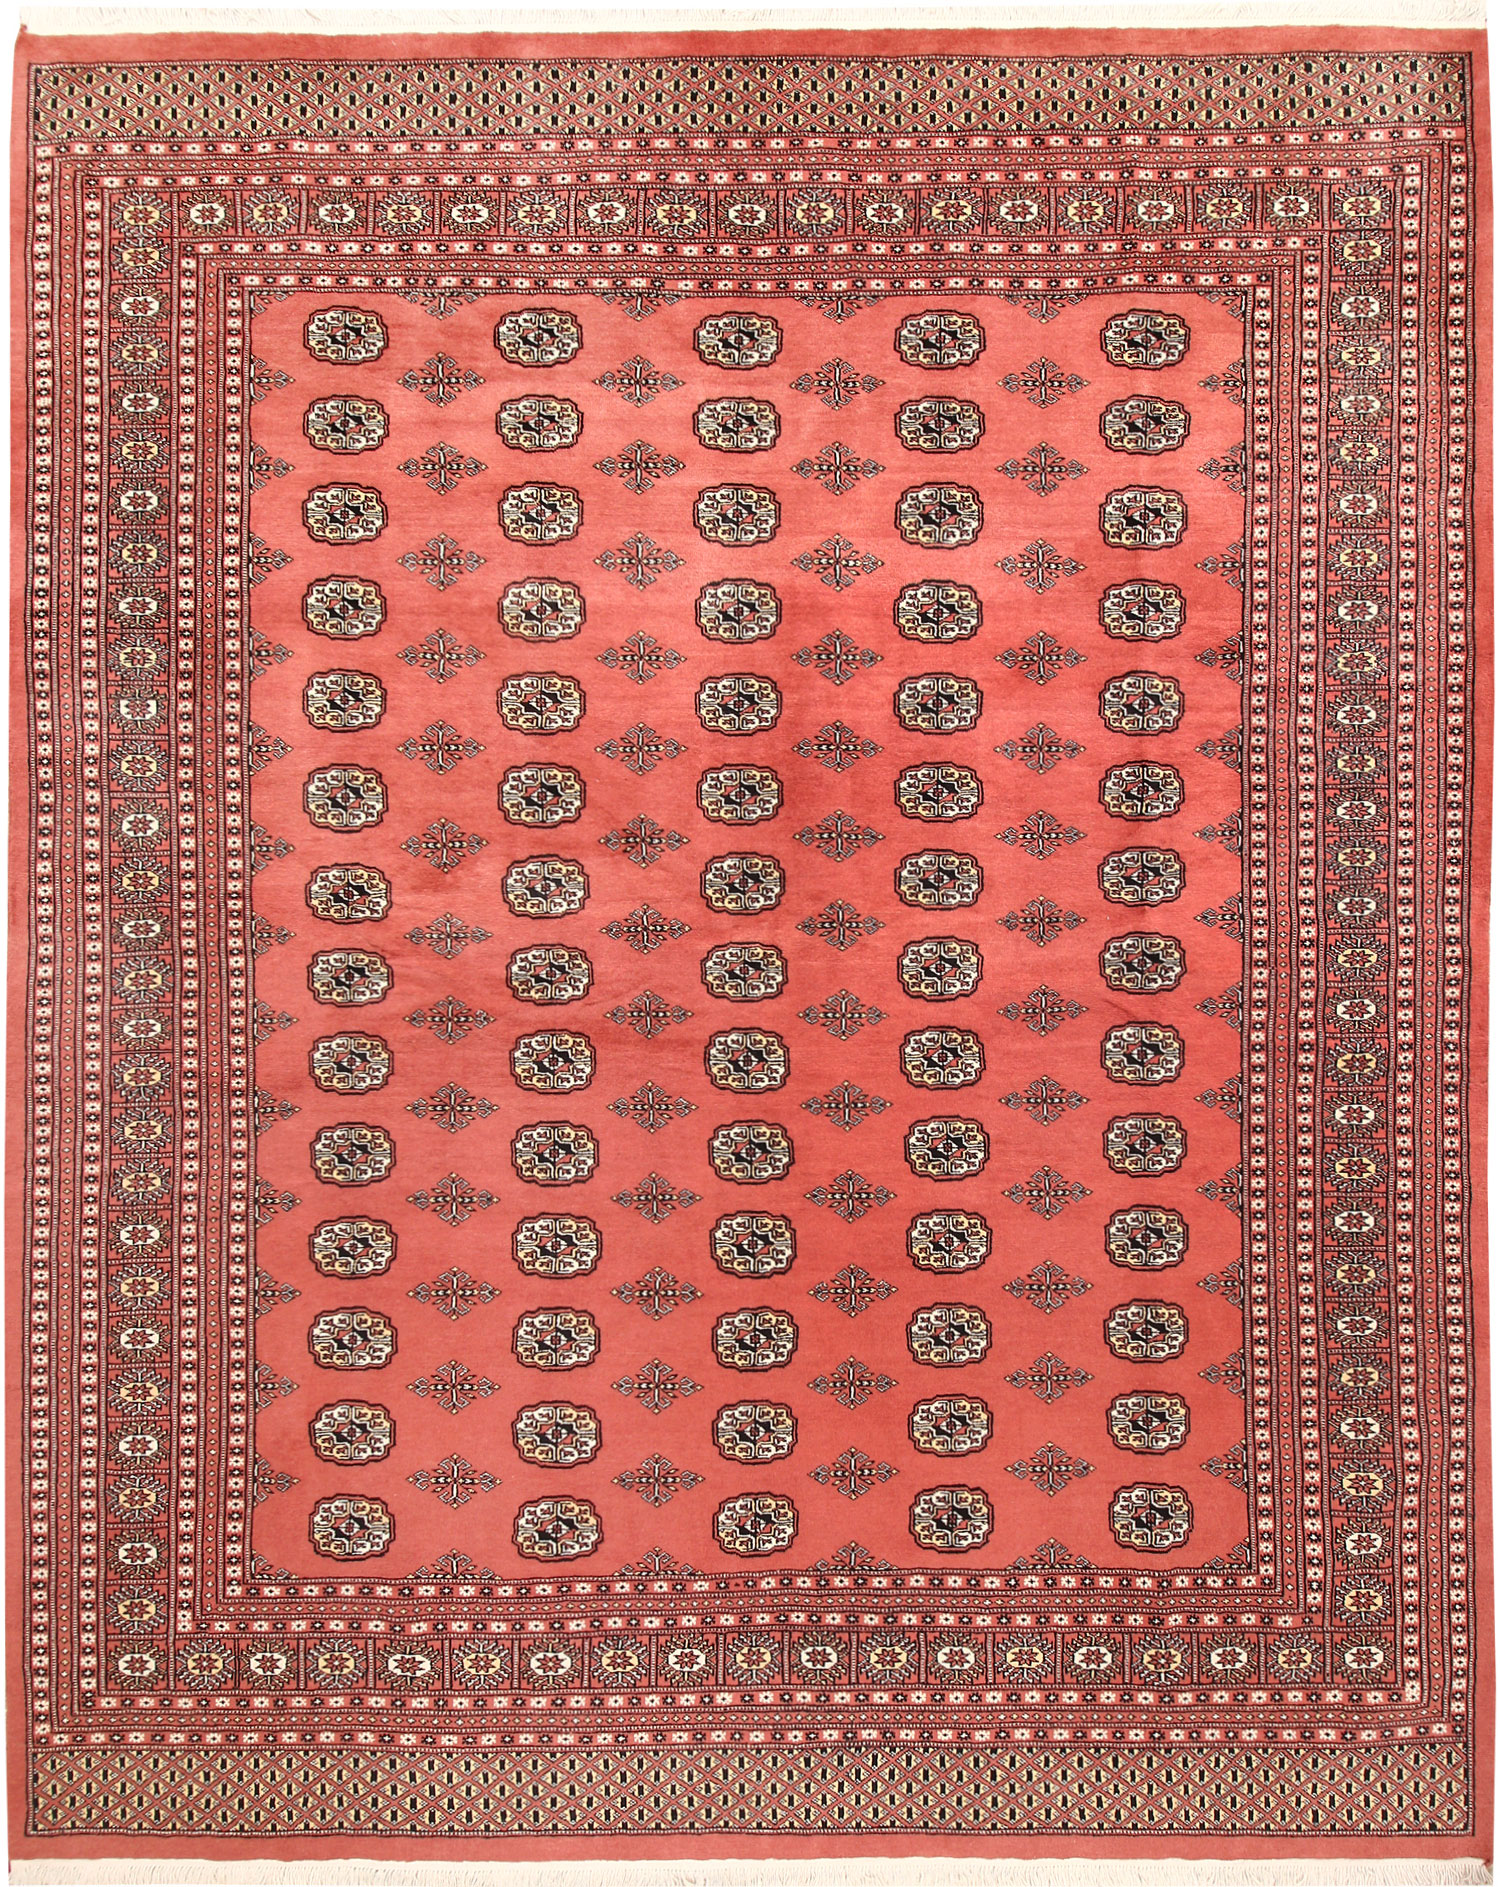 Woven Rugs Nyc